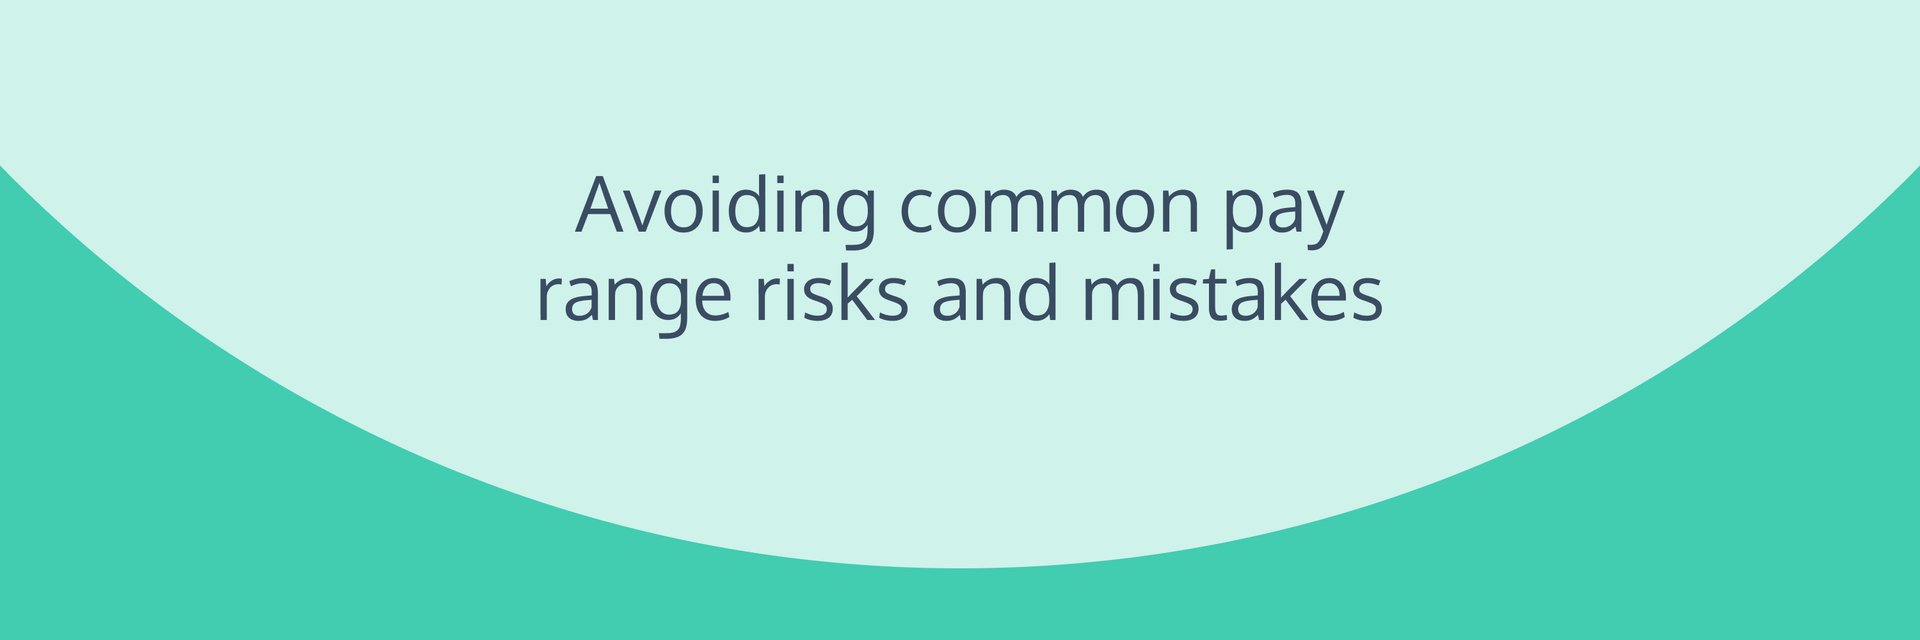 Avoiding common pay range risks and mistakes